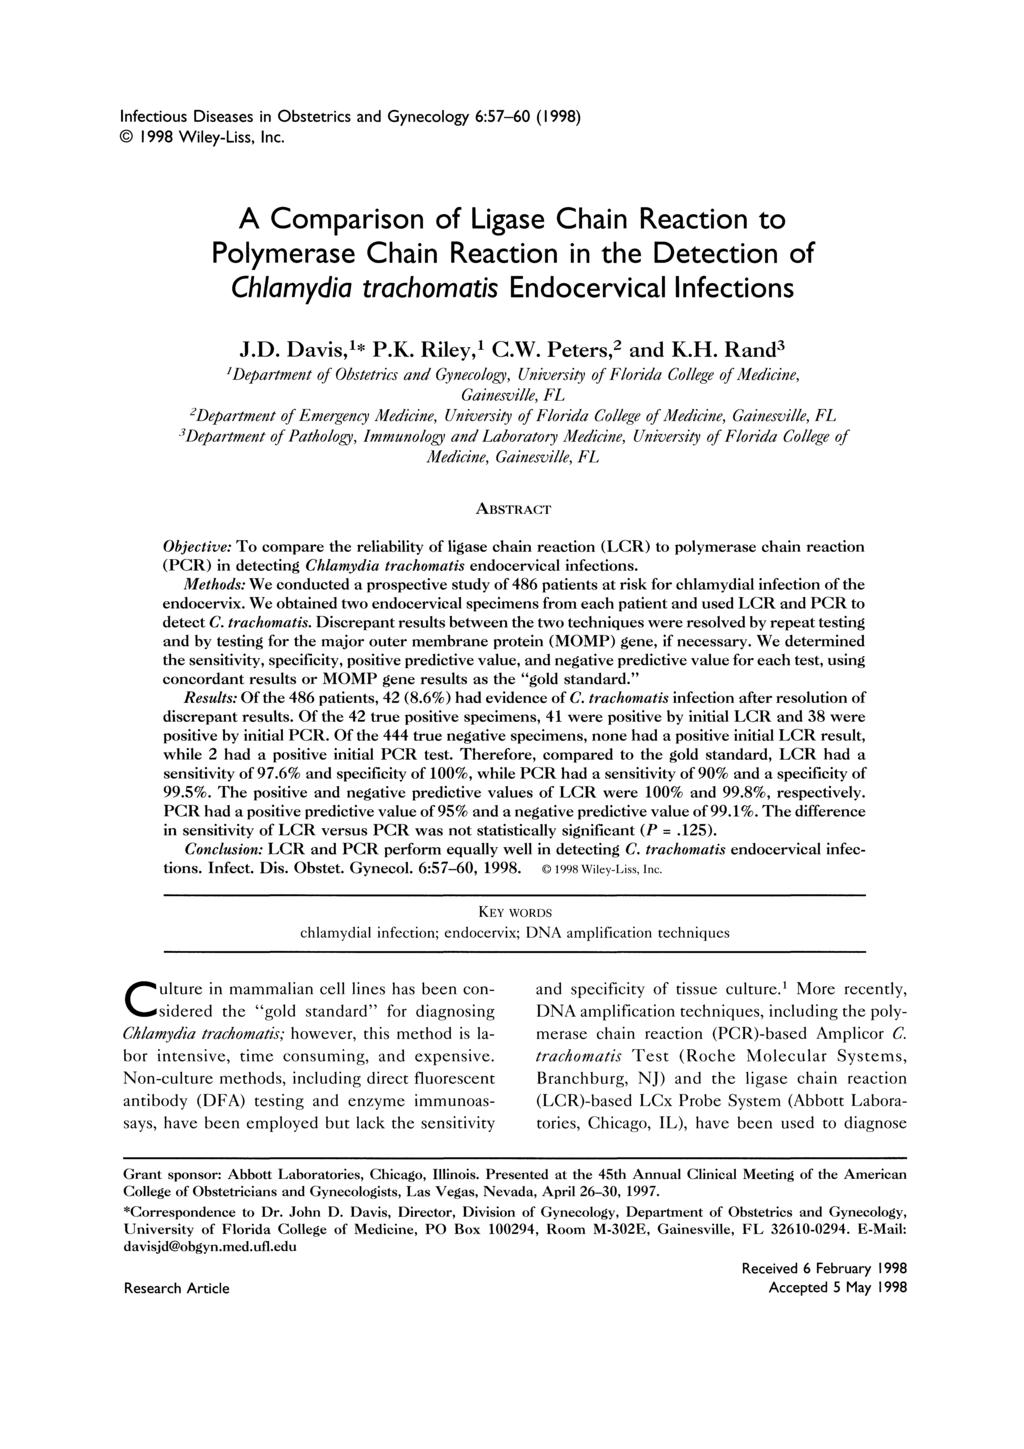 Infectious Diseases in Obstetrics and Gynecology 6:57-60 (I 998) (C) 1998 Wiley-Liss, Inc. A Comparison of Ligase Chain Reaction to Polymerase Chain Reaction in the Detection of C.